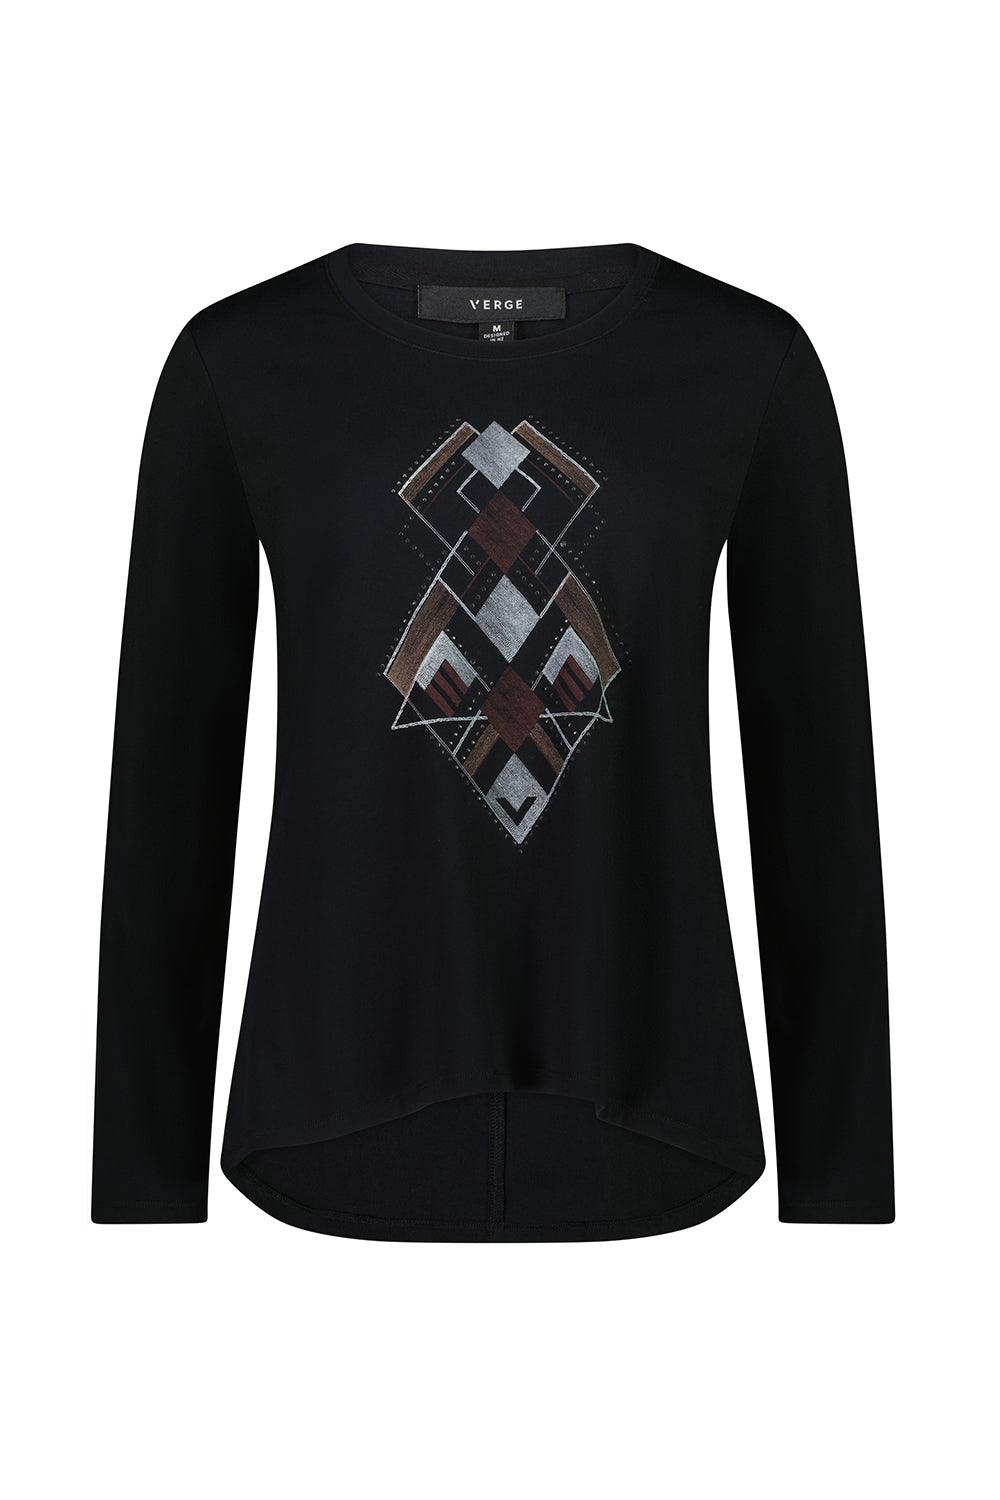 Sequence Top - Black - Top VERGE